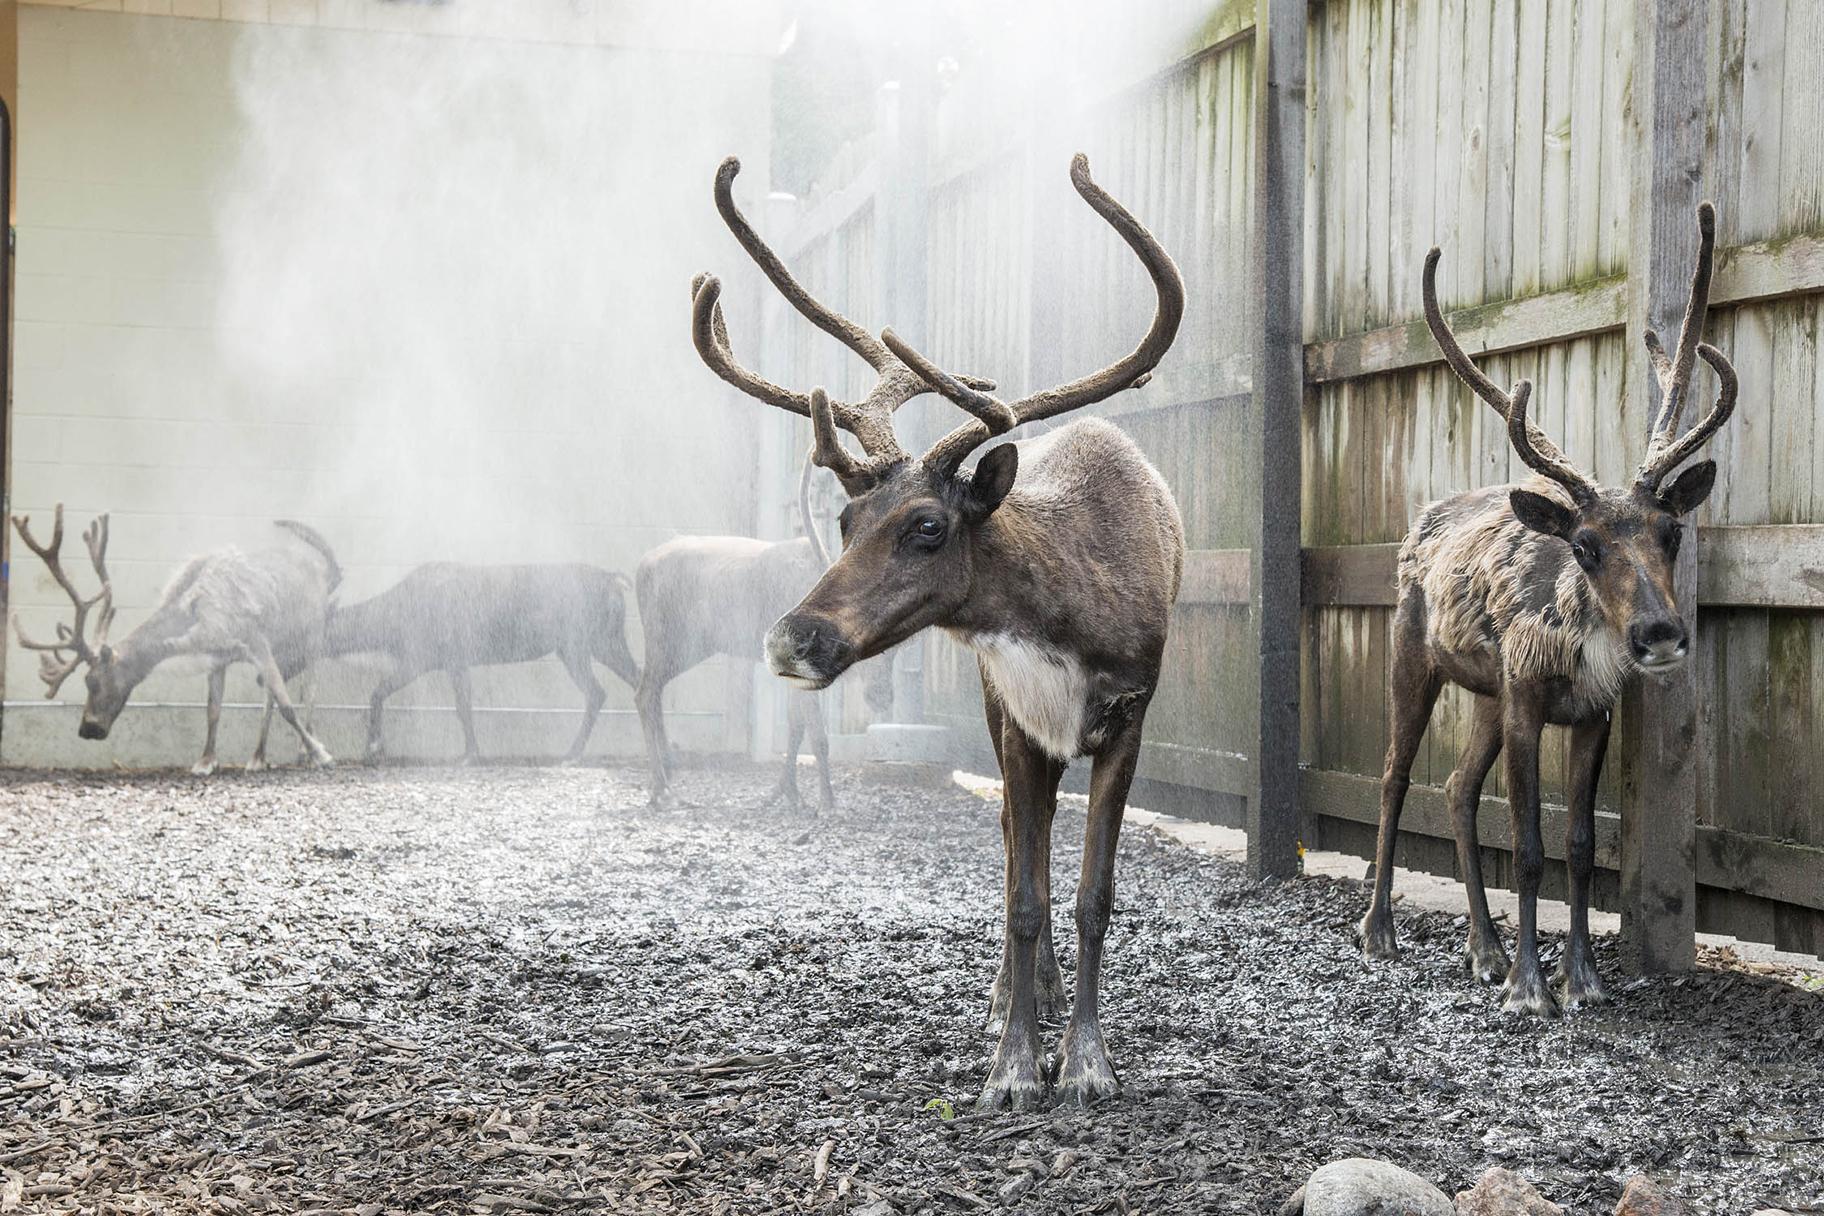 Reindeer at Brookfield Zoo keep cool by standing near misters set up by animal care staff in the reindeer habitat. (Kelly Tone / Chicago Zoological Society) 